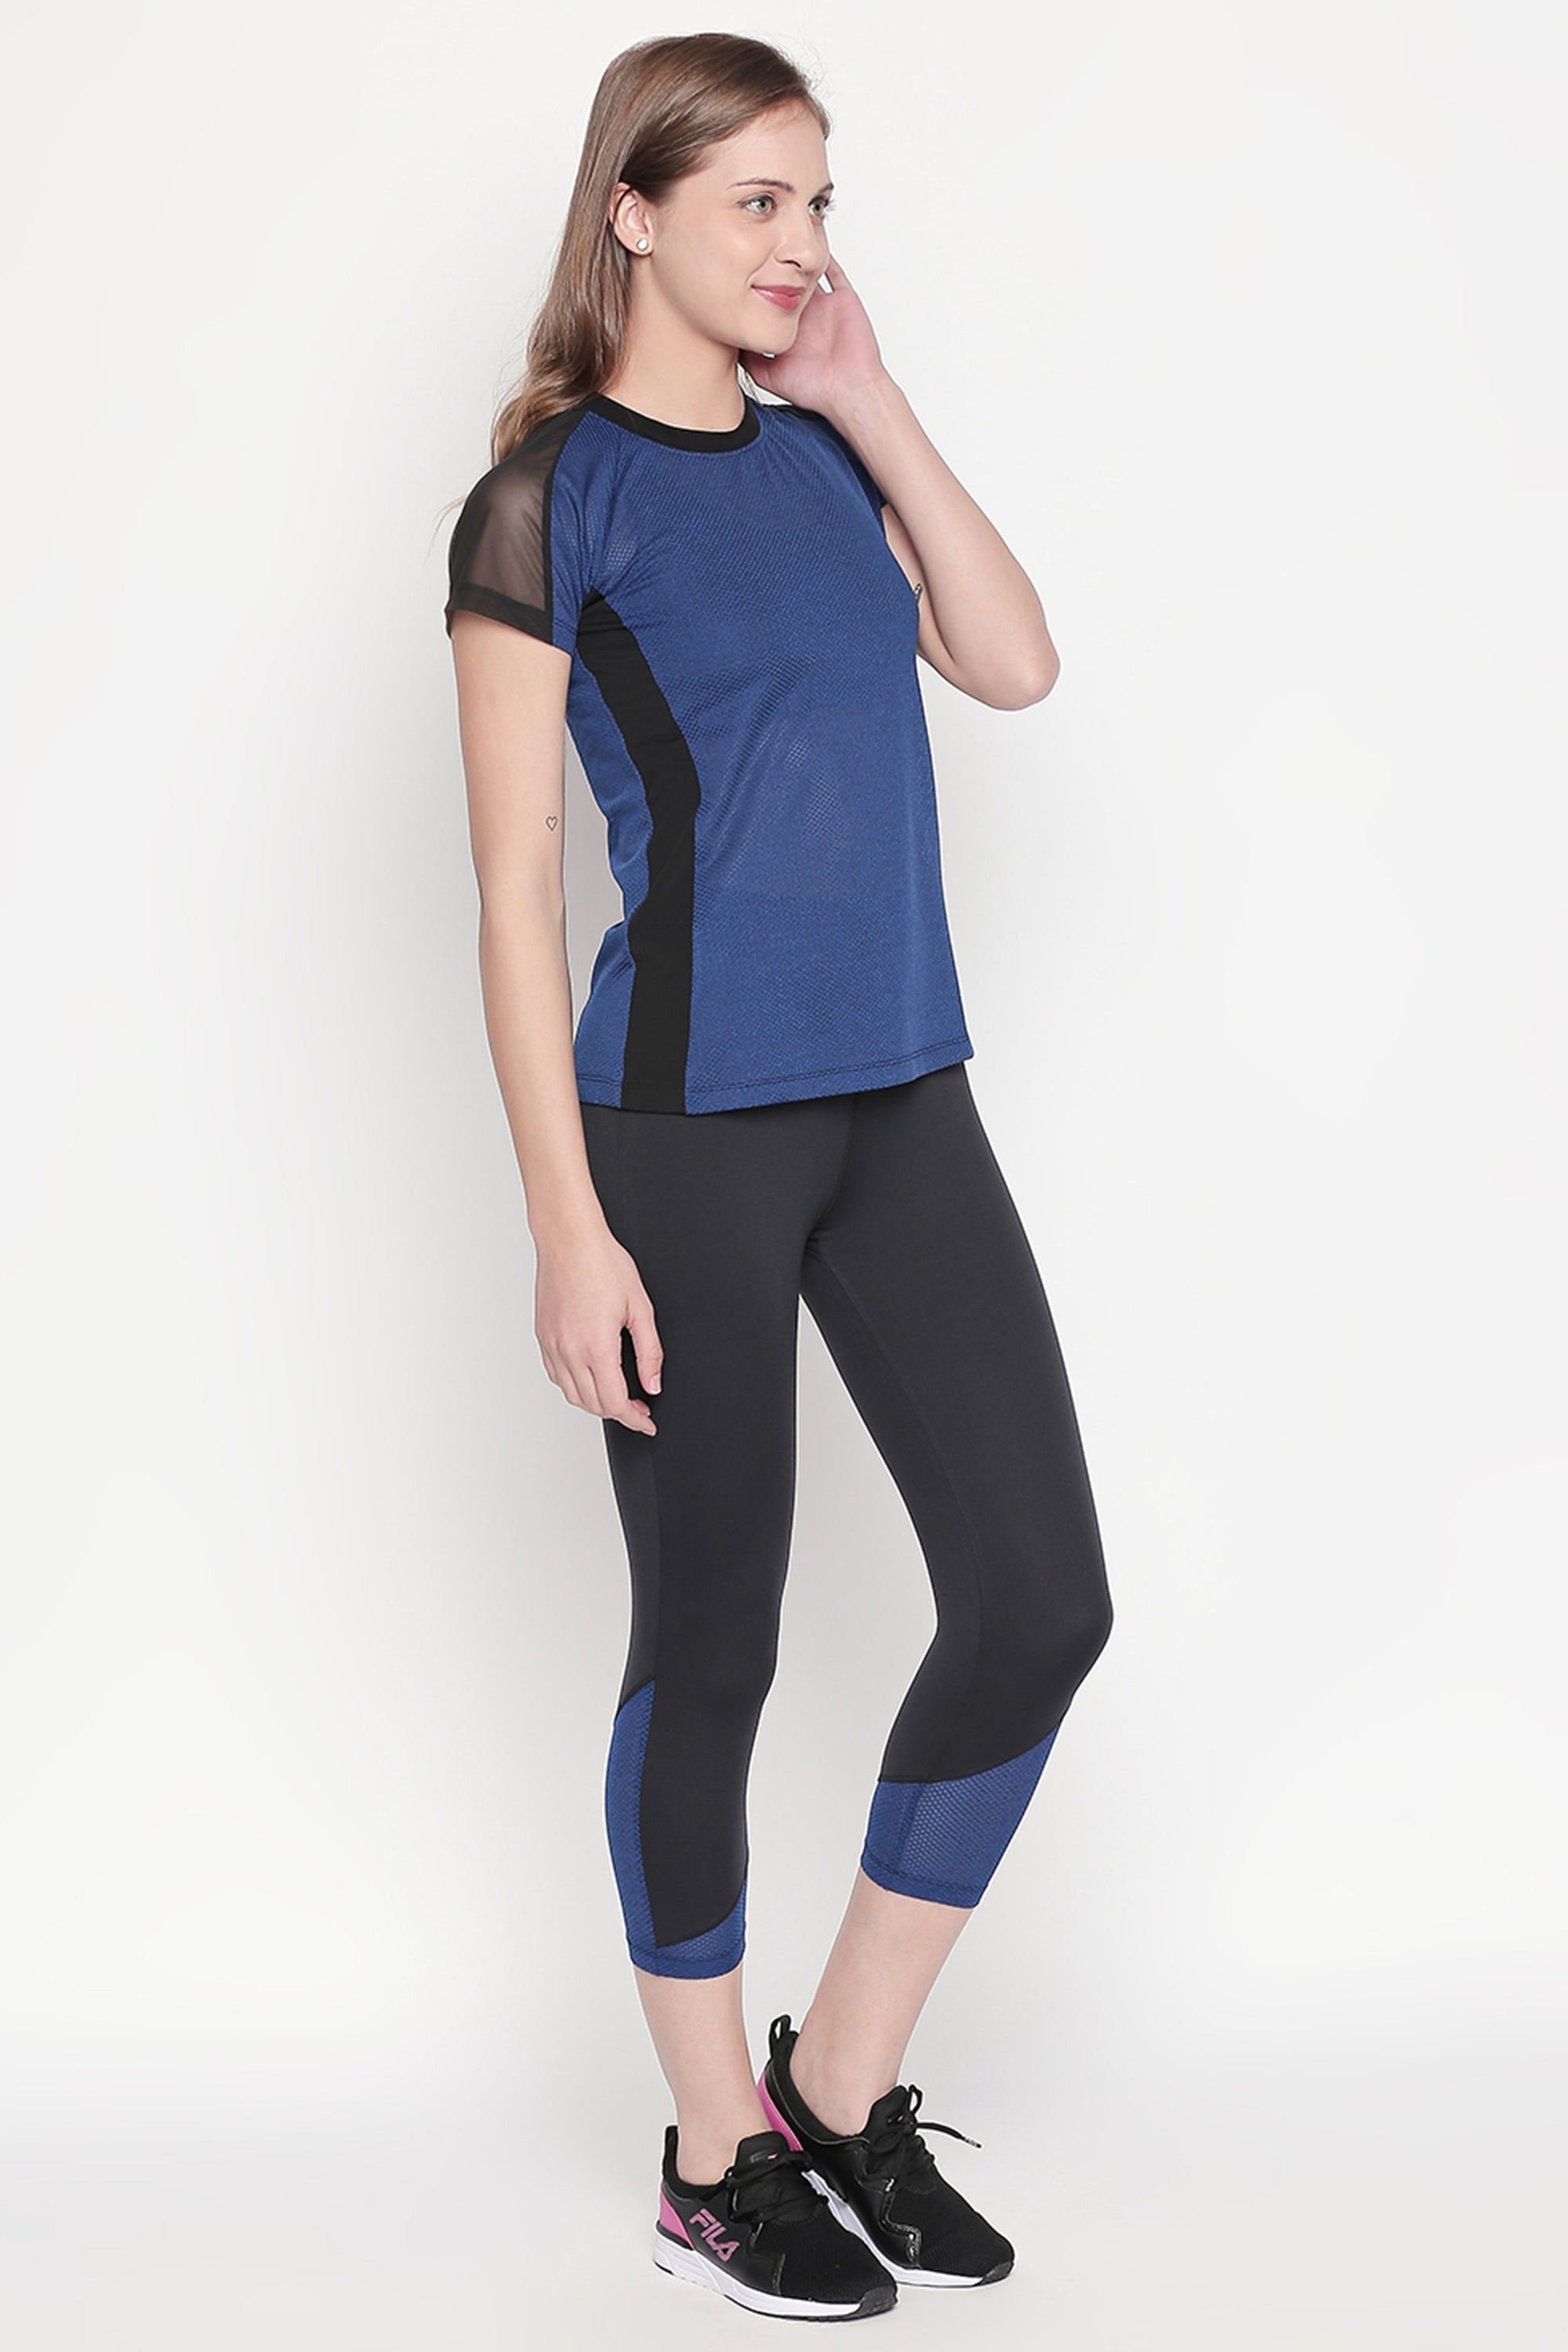 Blue - Textured Top With Net Sleeves